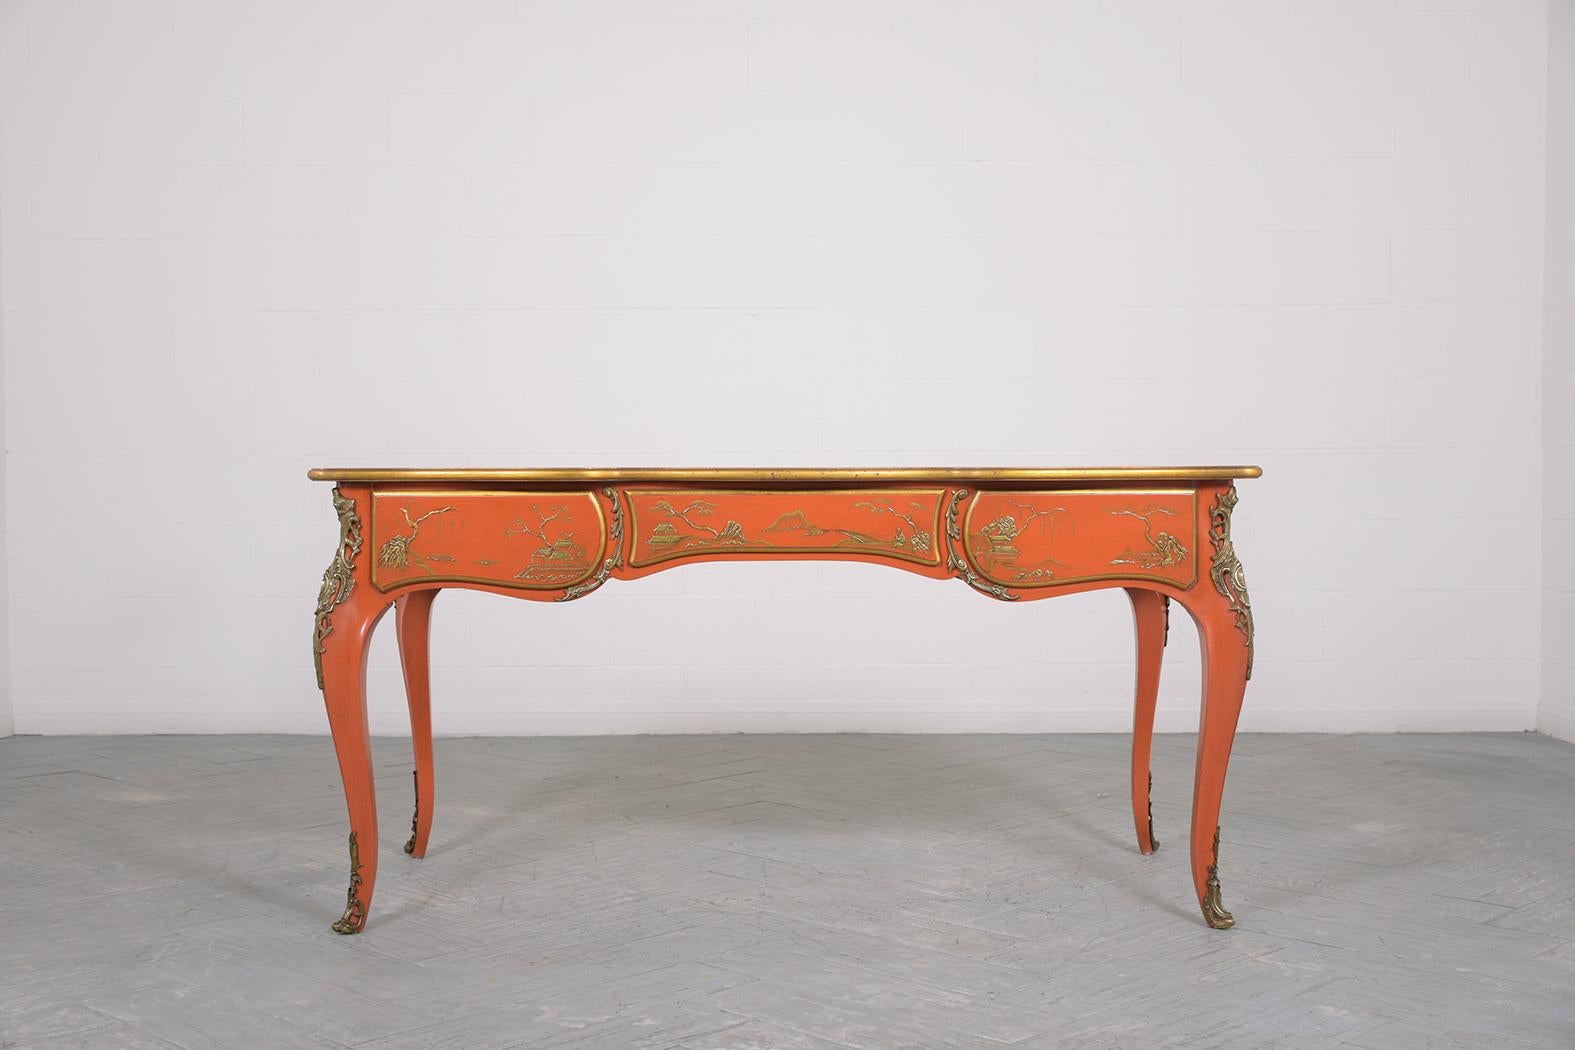 1970s Chinoiserie-Style Walnut Desk with Engraved Leather Top & Brass Accents For Sale 5